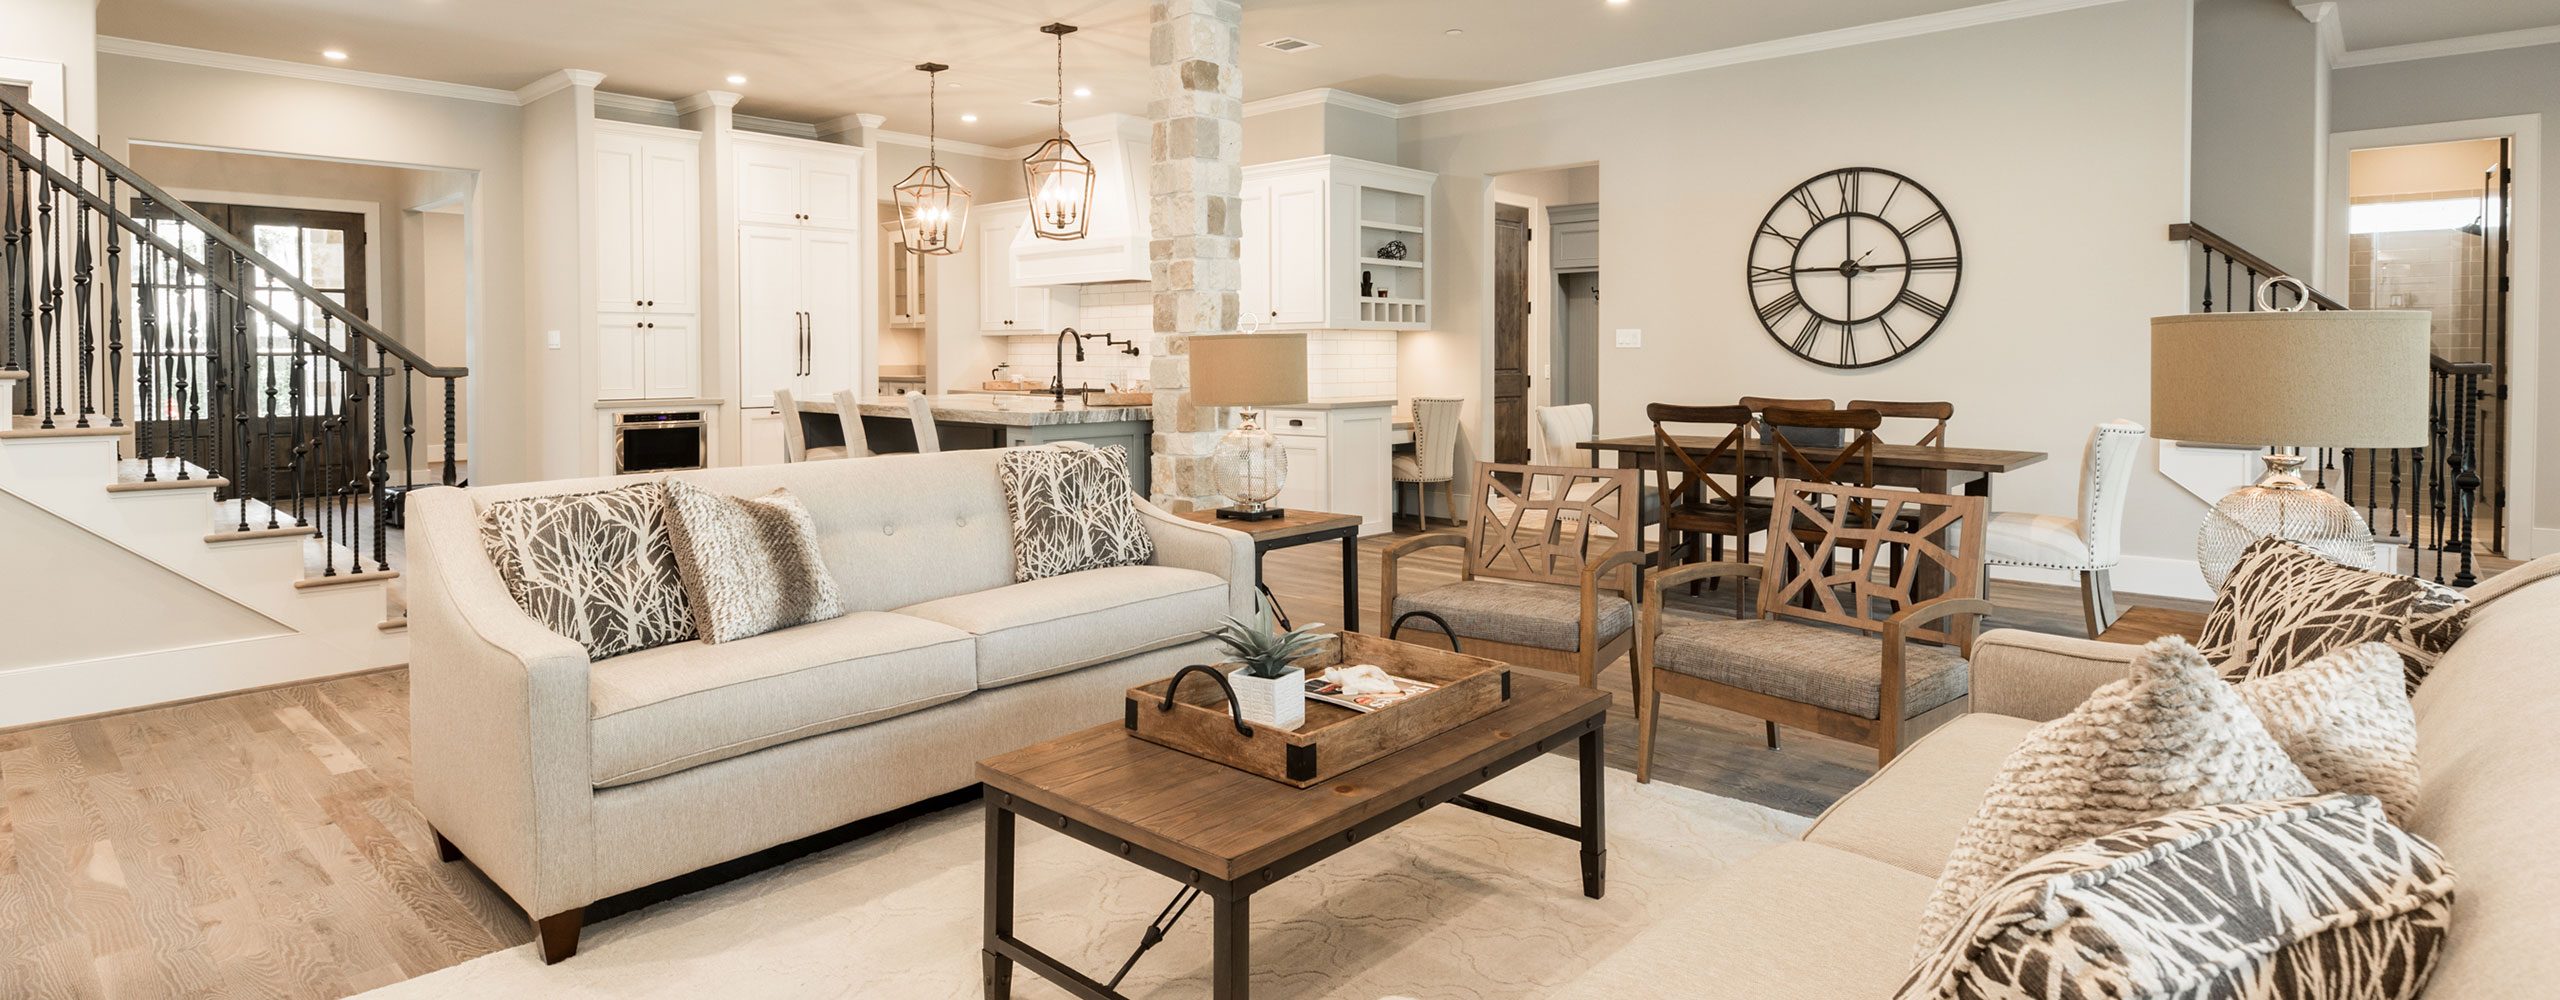 Living room staging in Houston, Texas